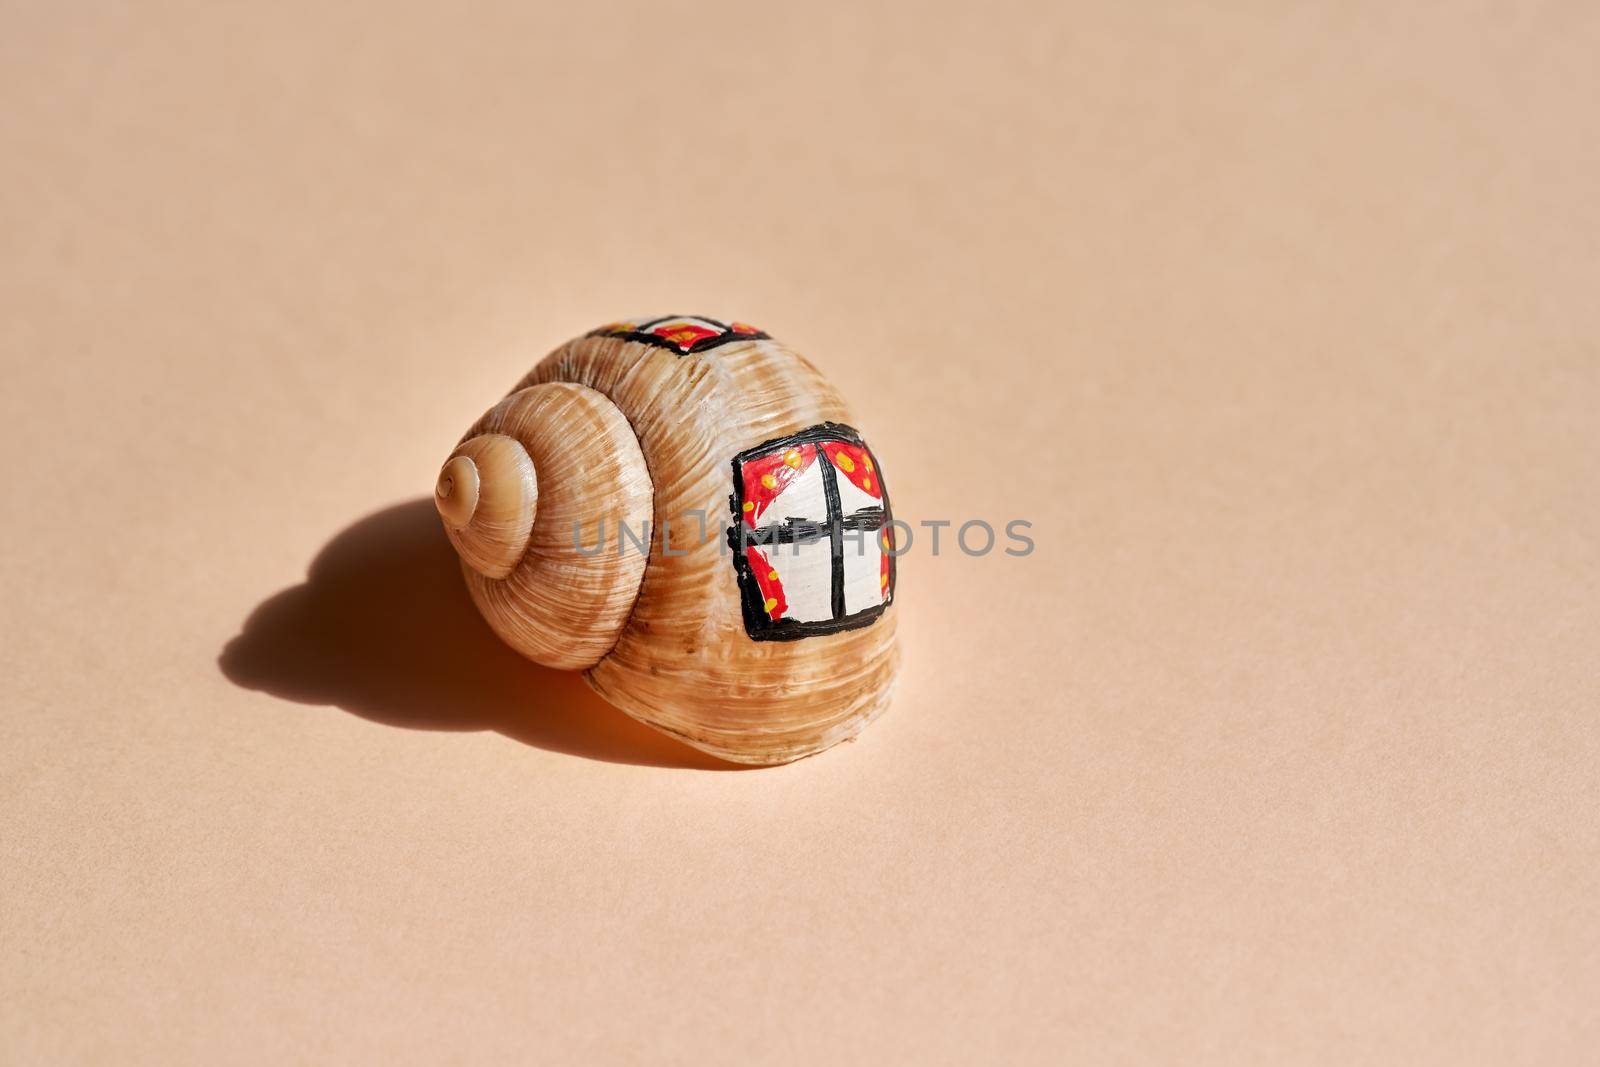 A snail shell with a window painted on it by madeleine_steinbach